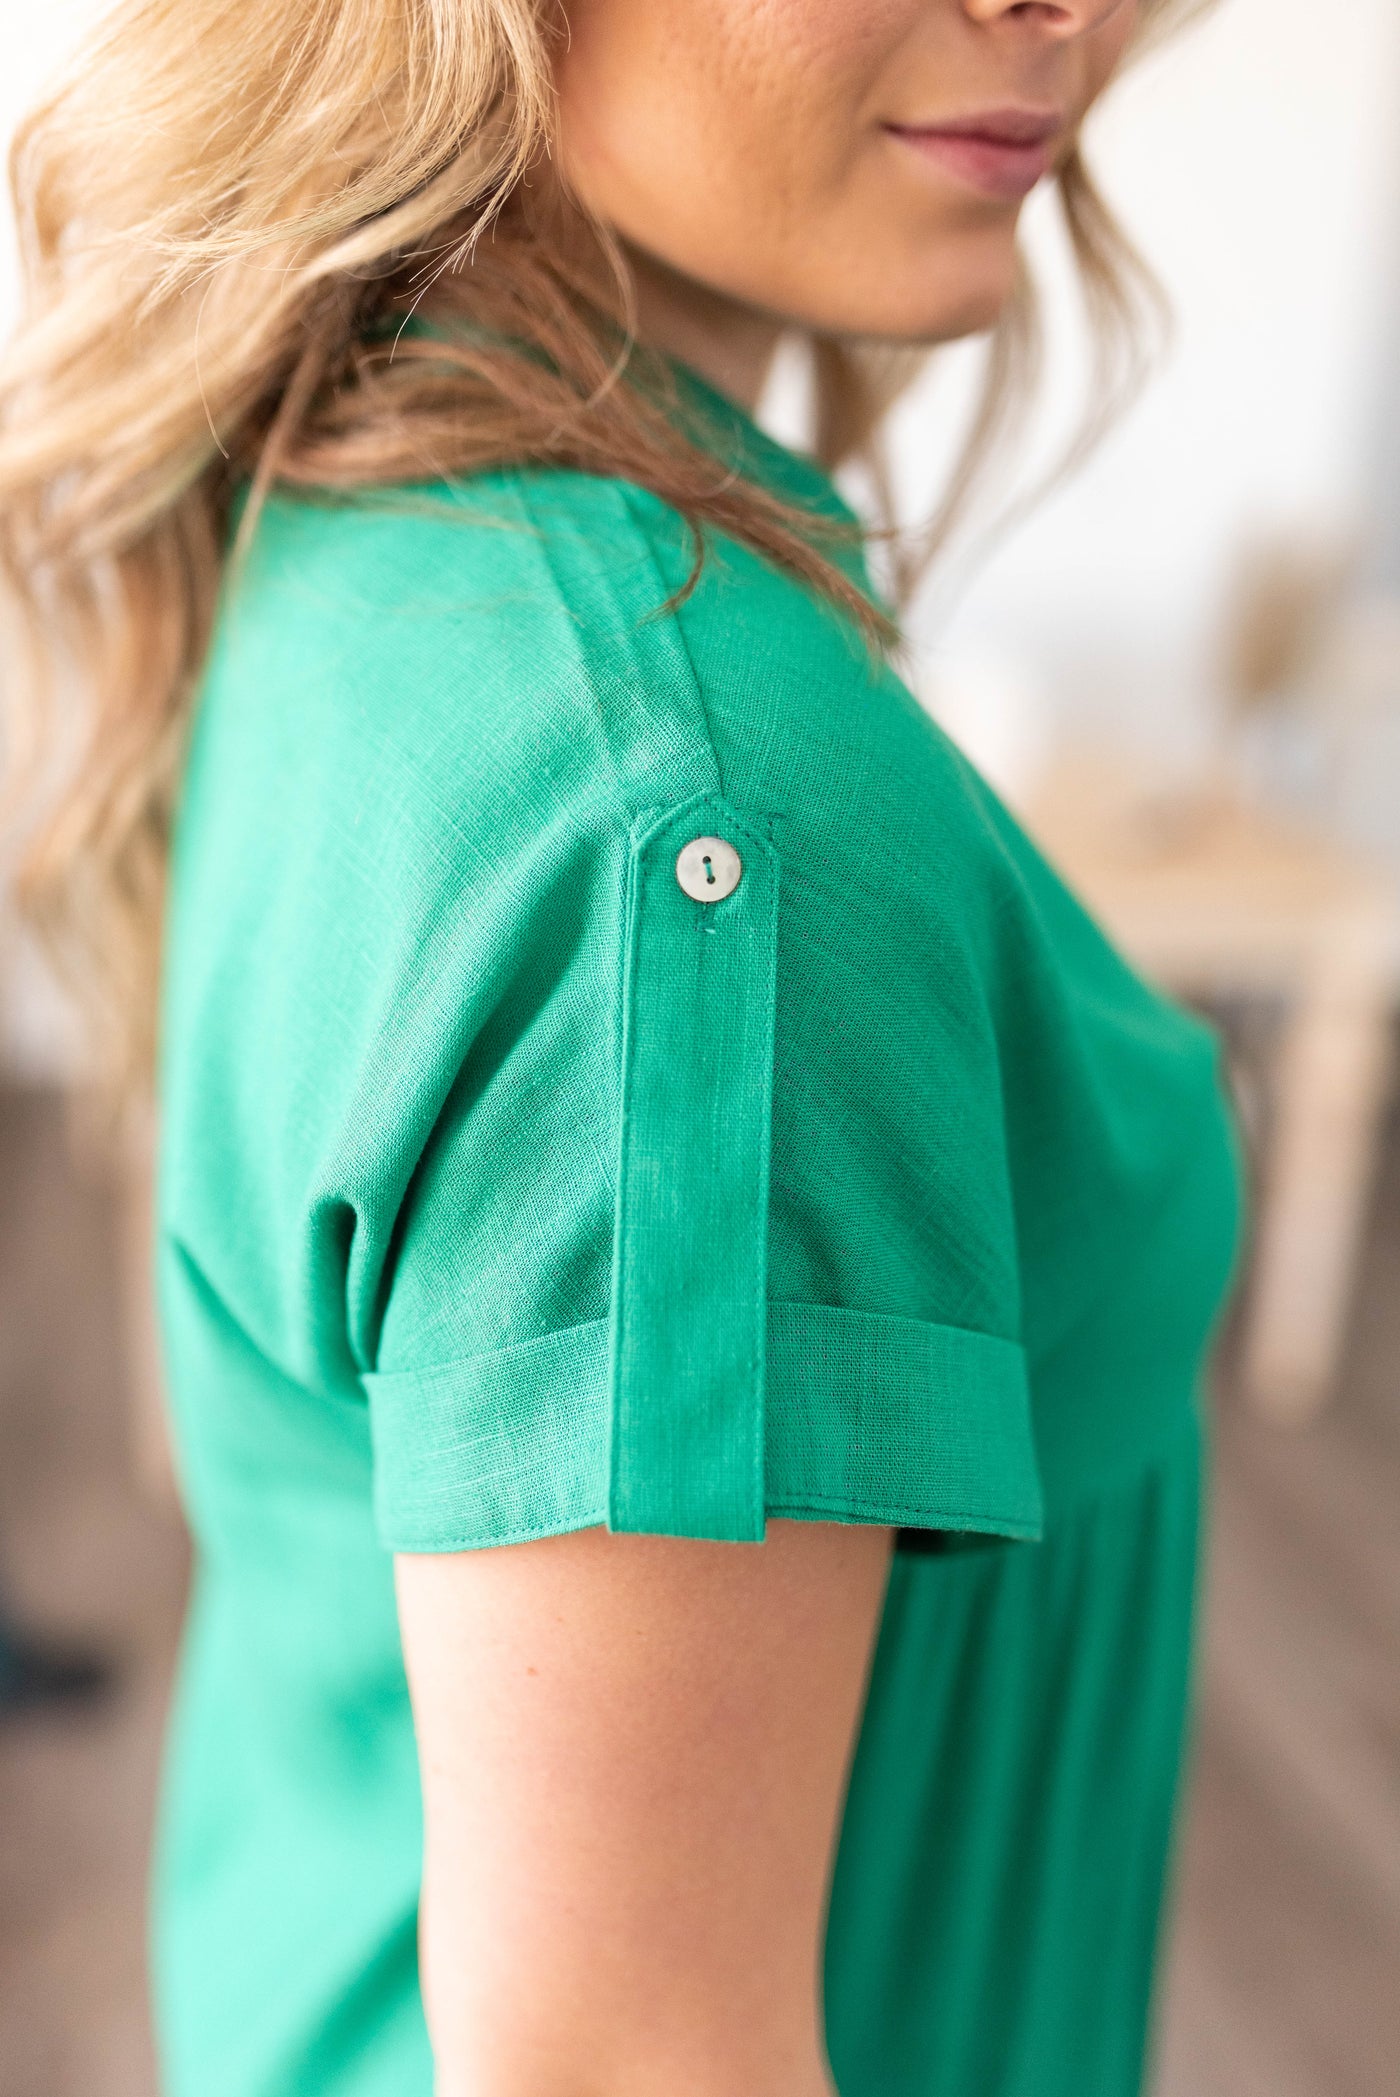 The sleeve detail on the green button down dress